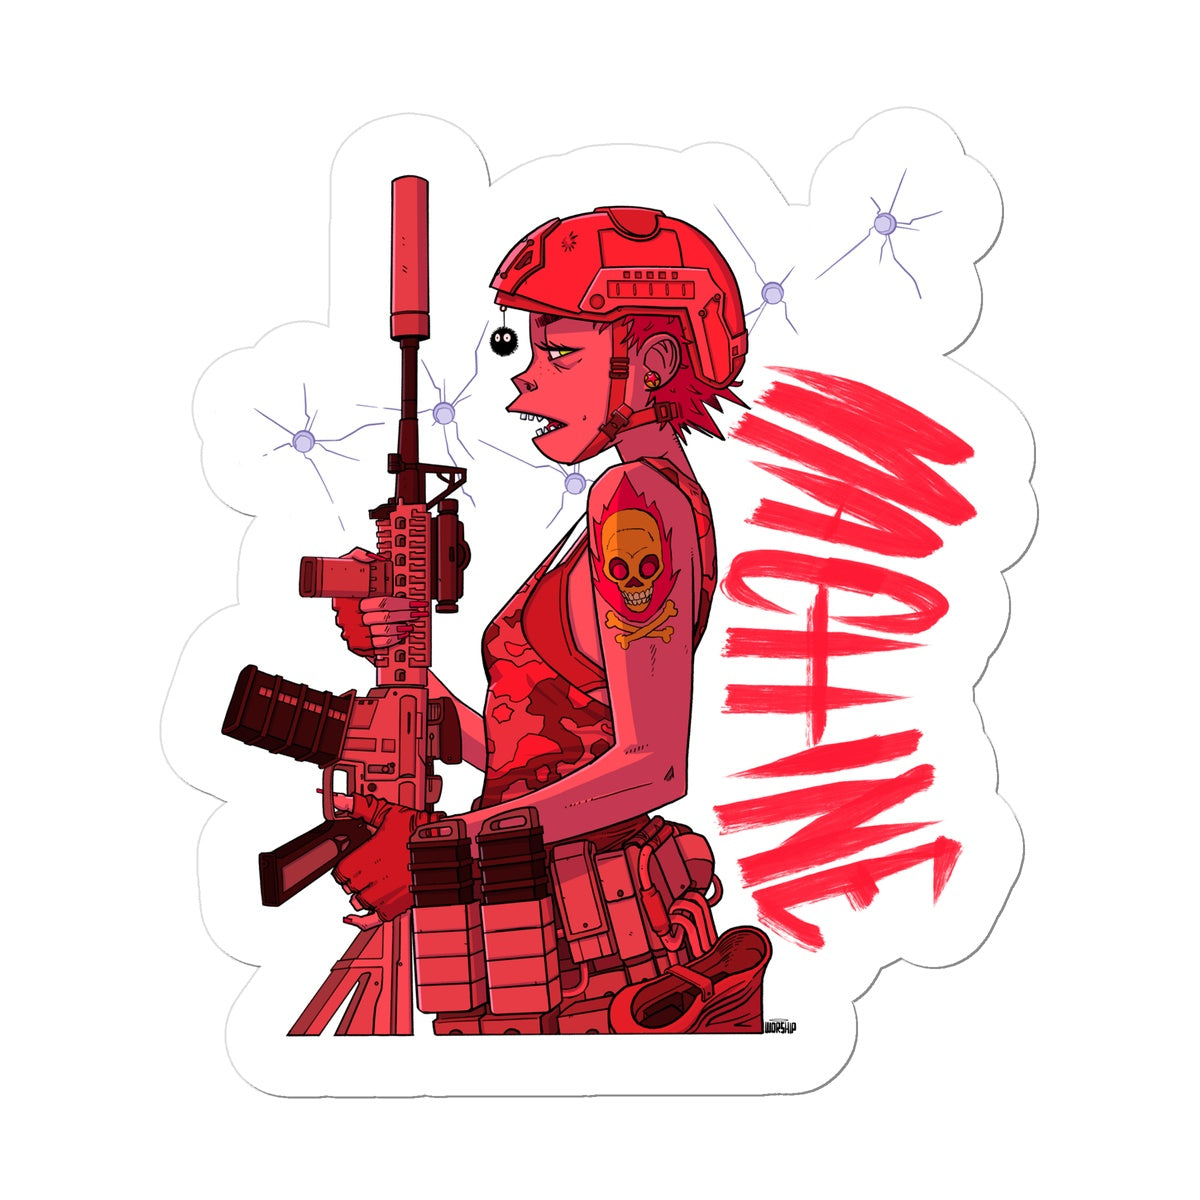 Unique and cool Gorillaz-style special forces sticker illustration